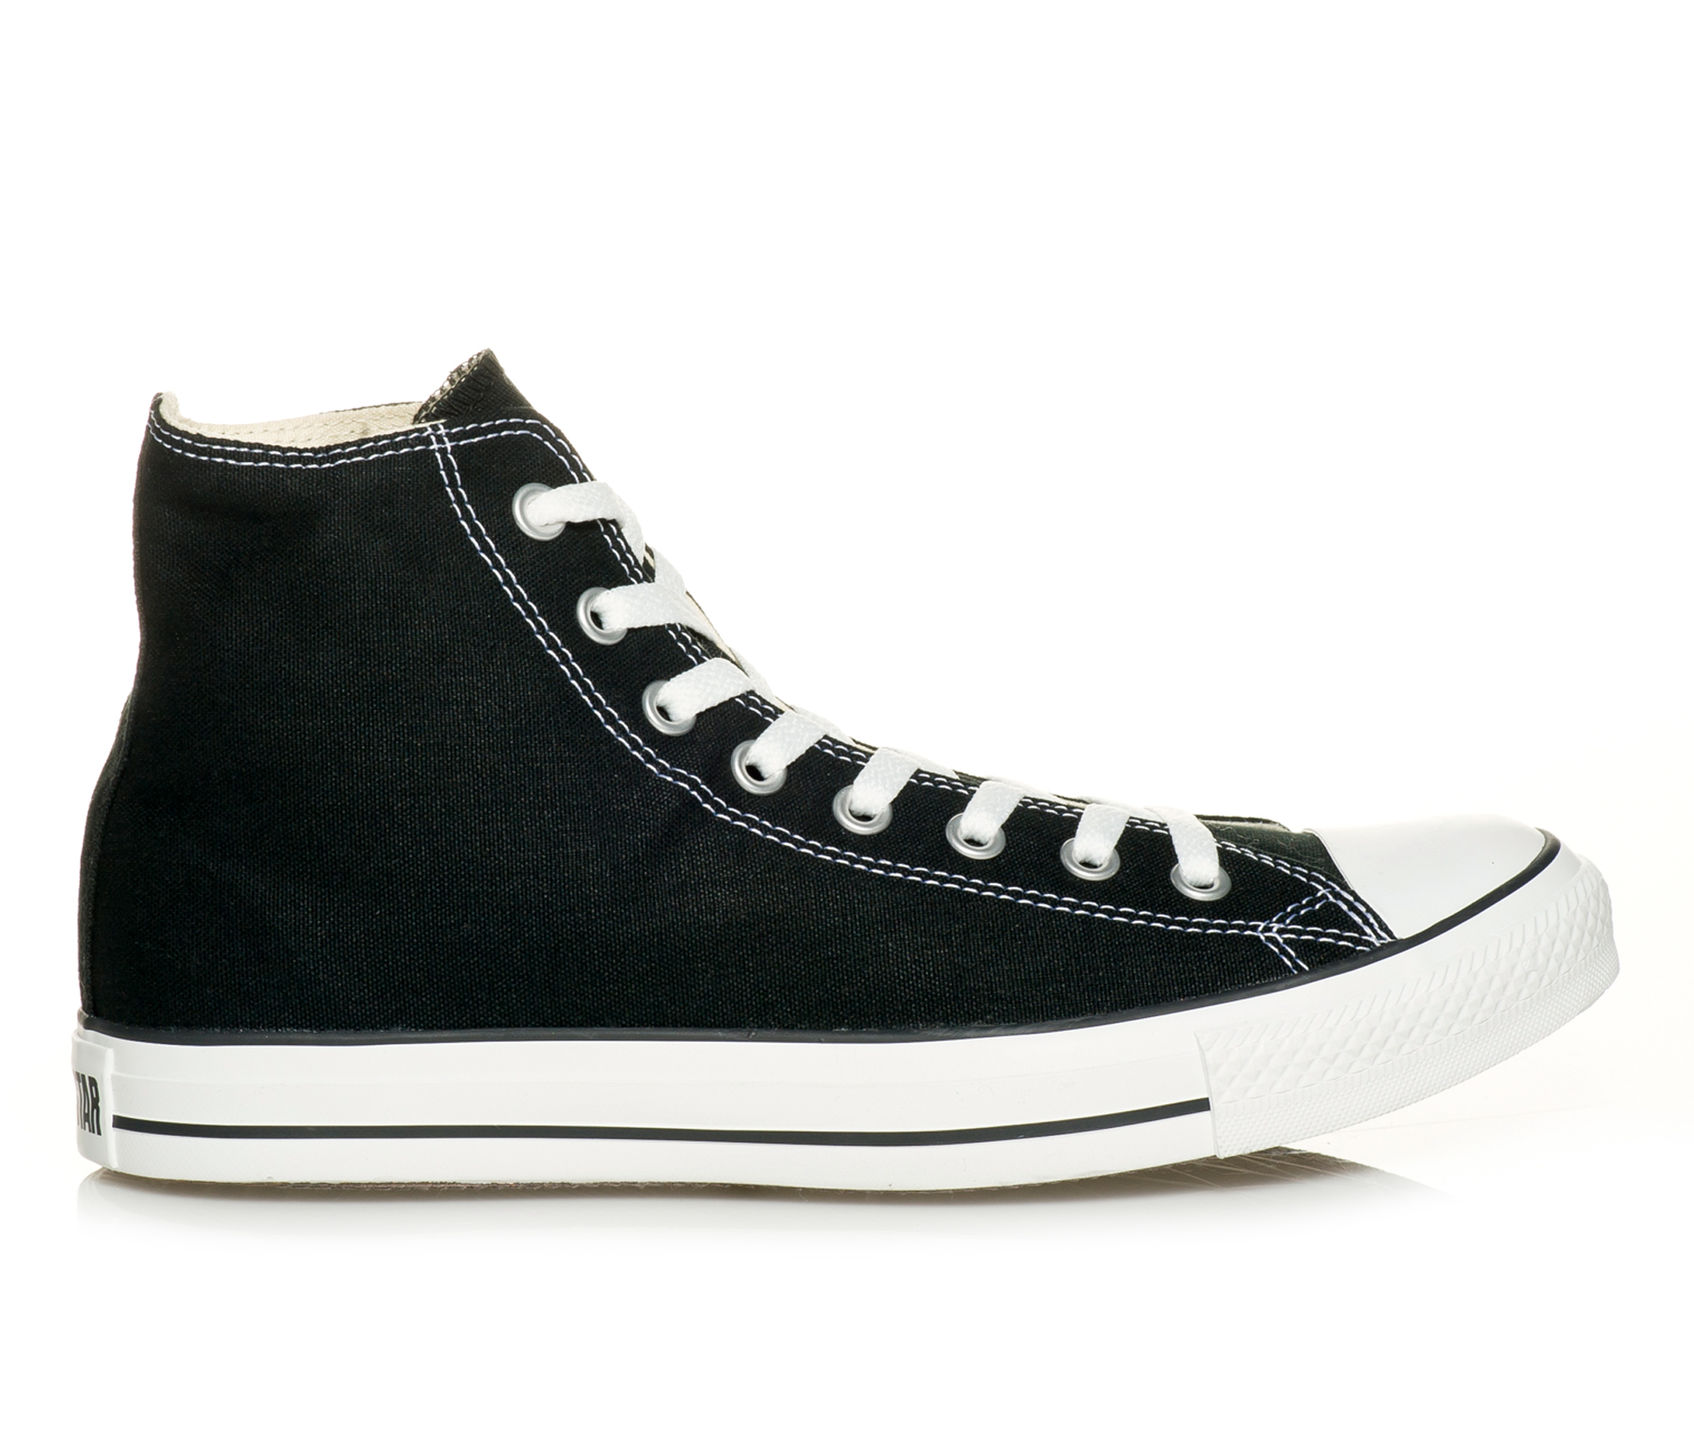 Adults' Converse Chuck Taylor All Star Canvas Hi Sneakers